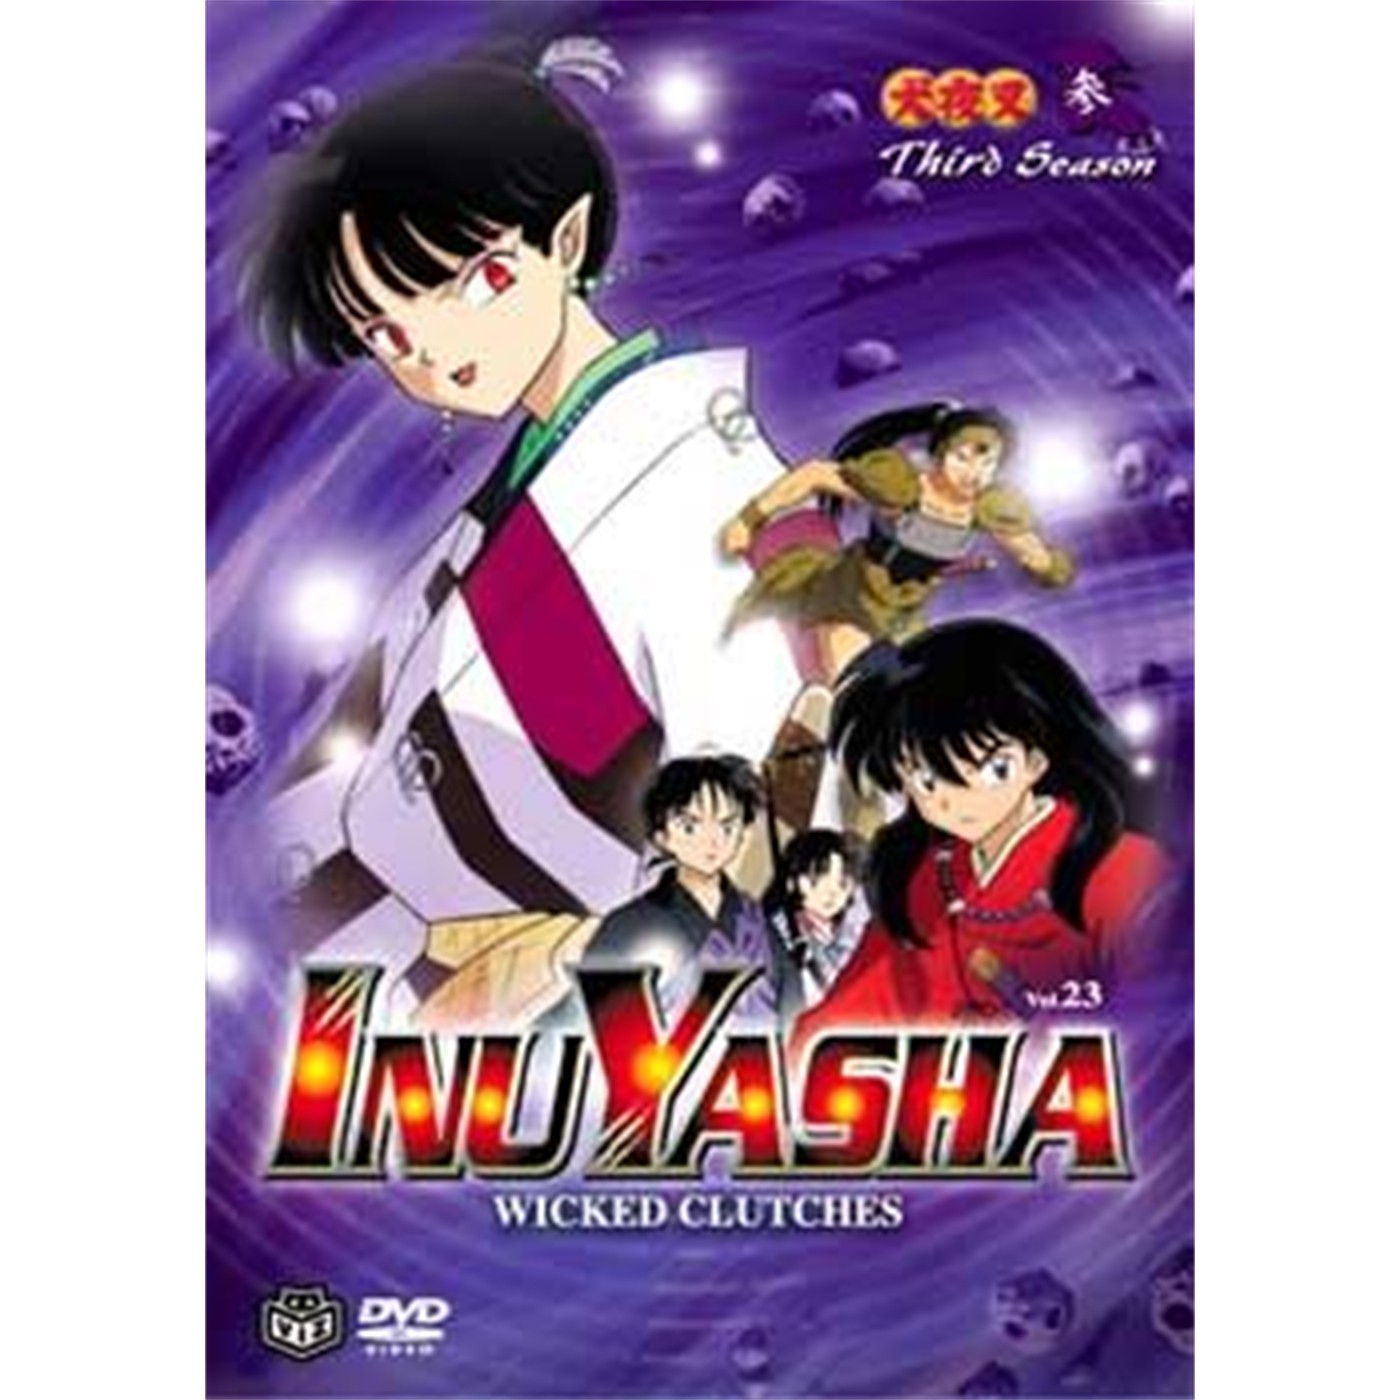 InuYasha, Vol. 23: Wicked Clutches (DVD)